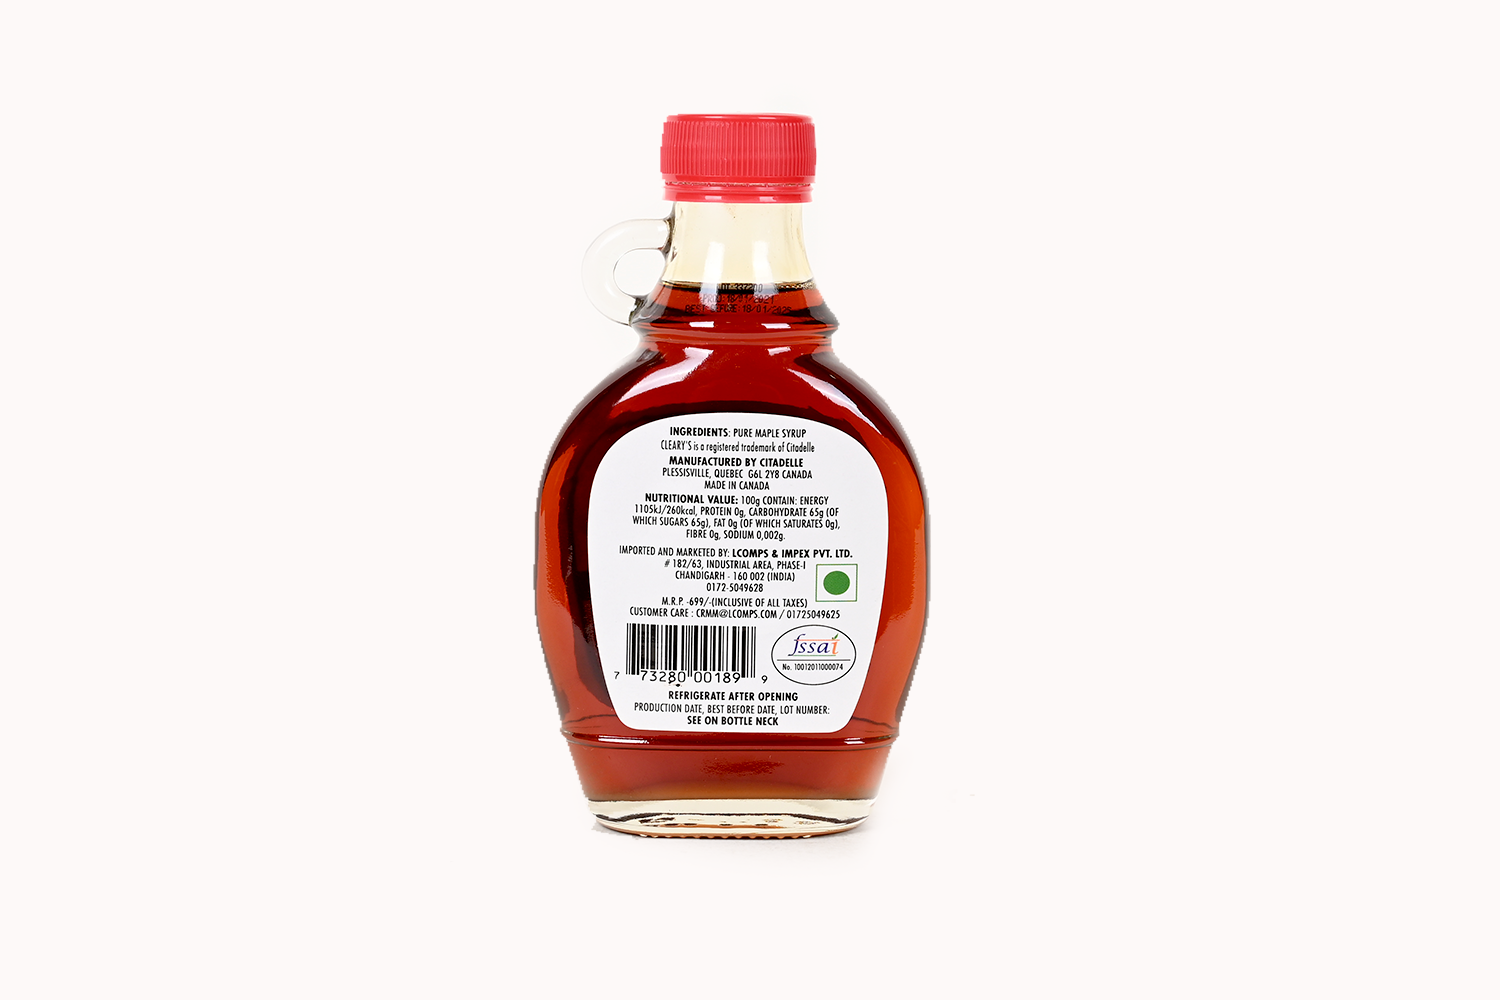 /c/l/clearys-pure-maple-syrup-189ml-2_yfaooaulczgs7p9z.jpg